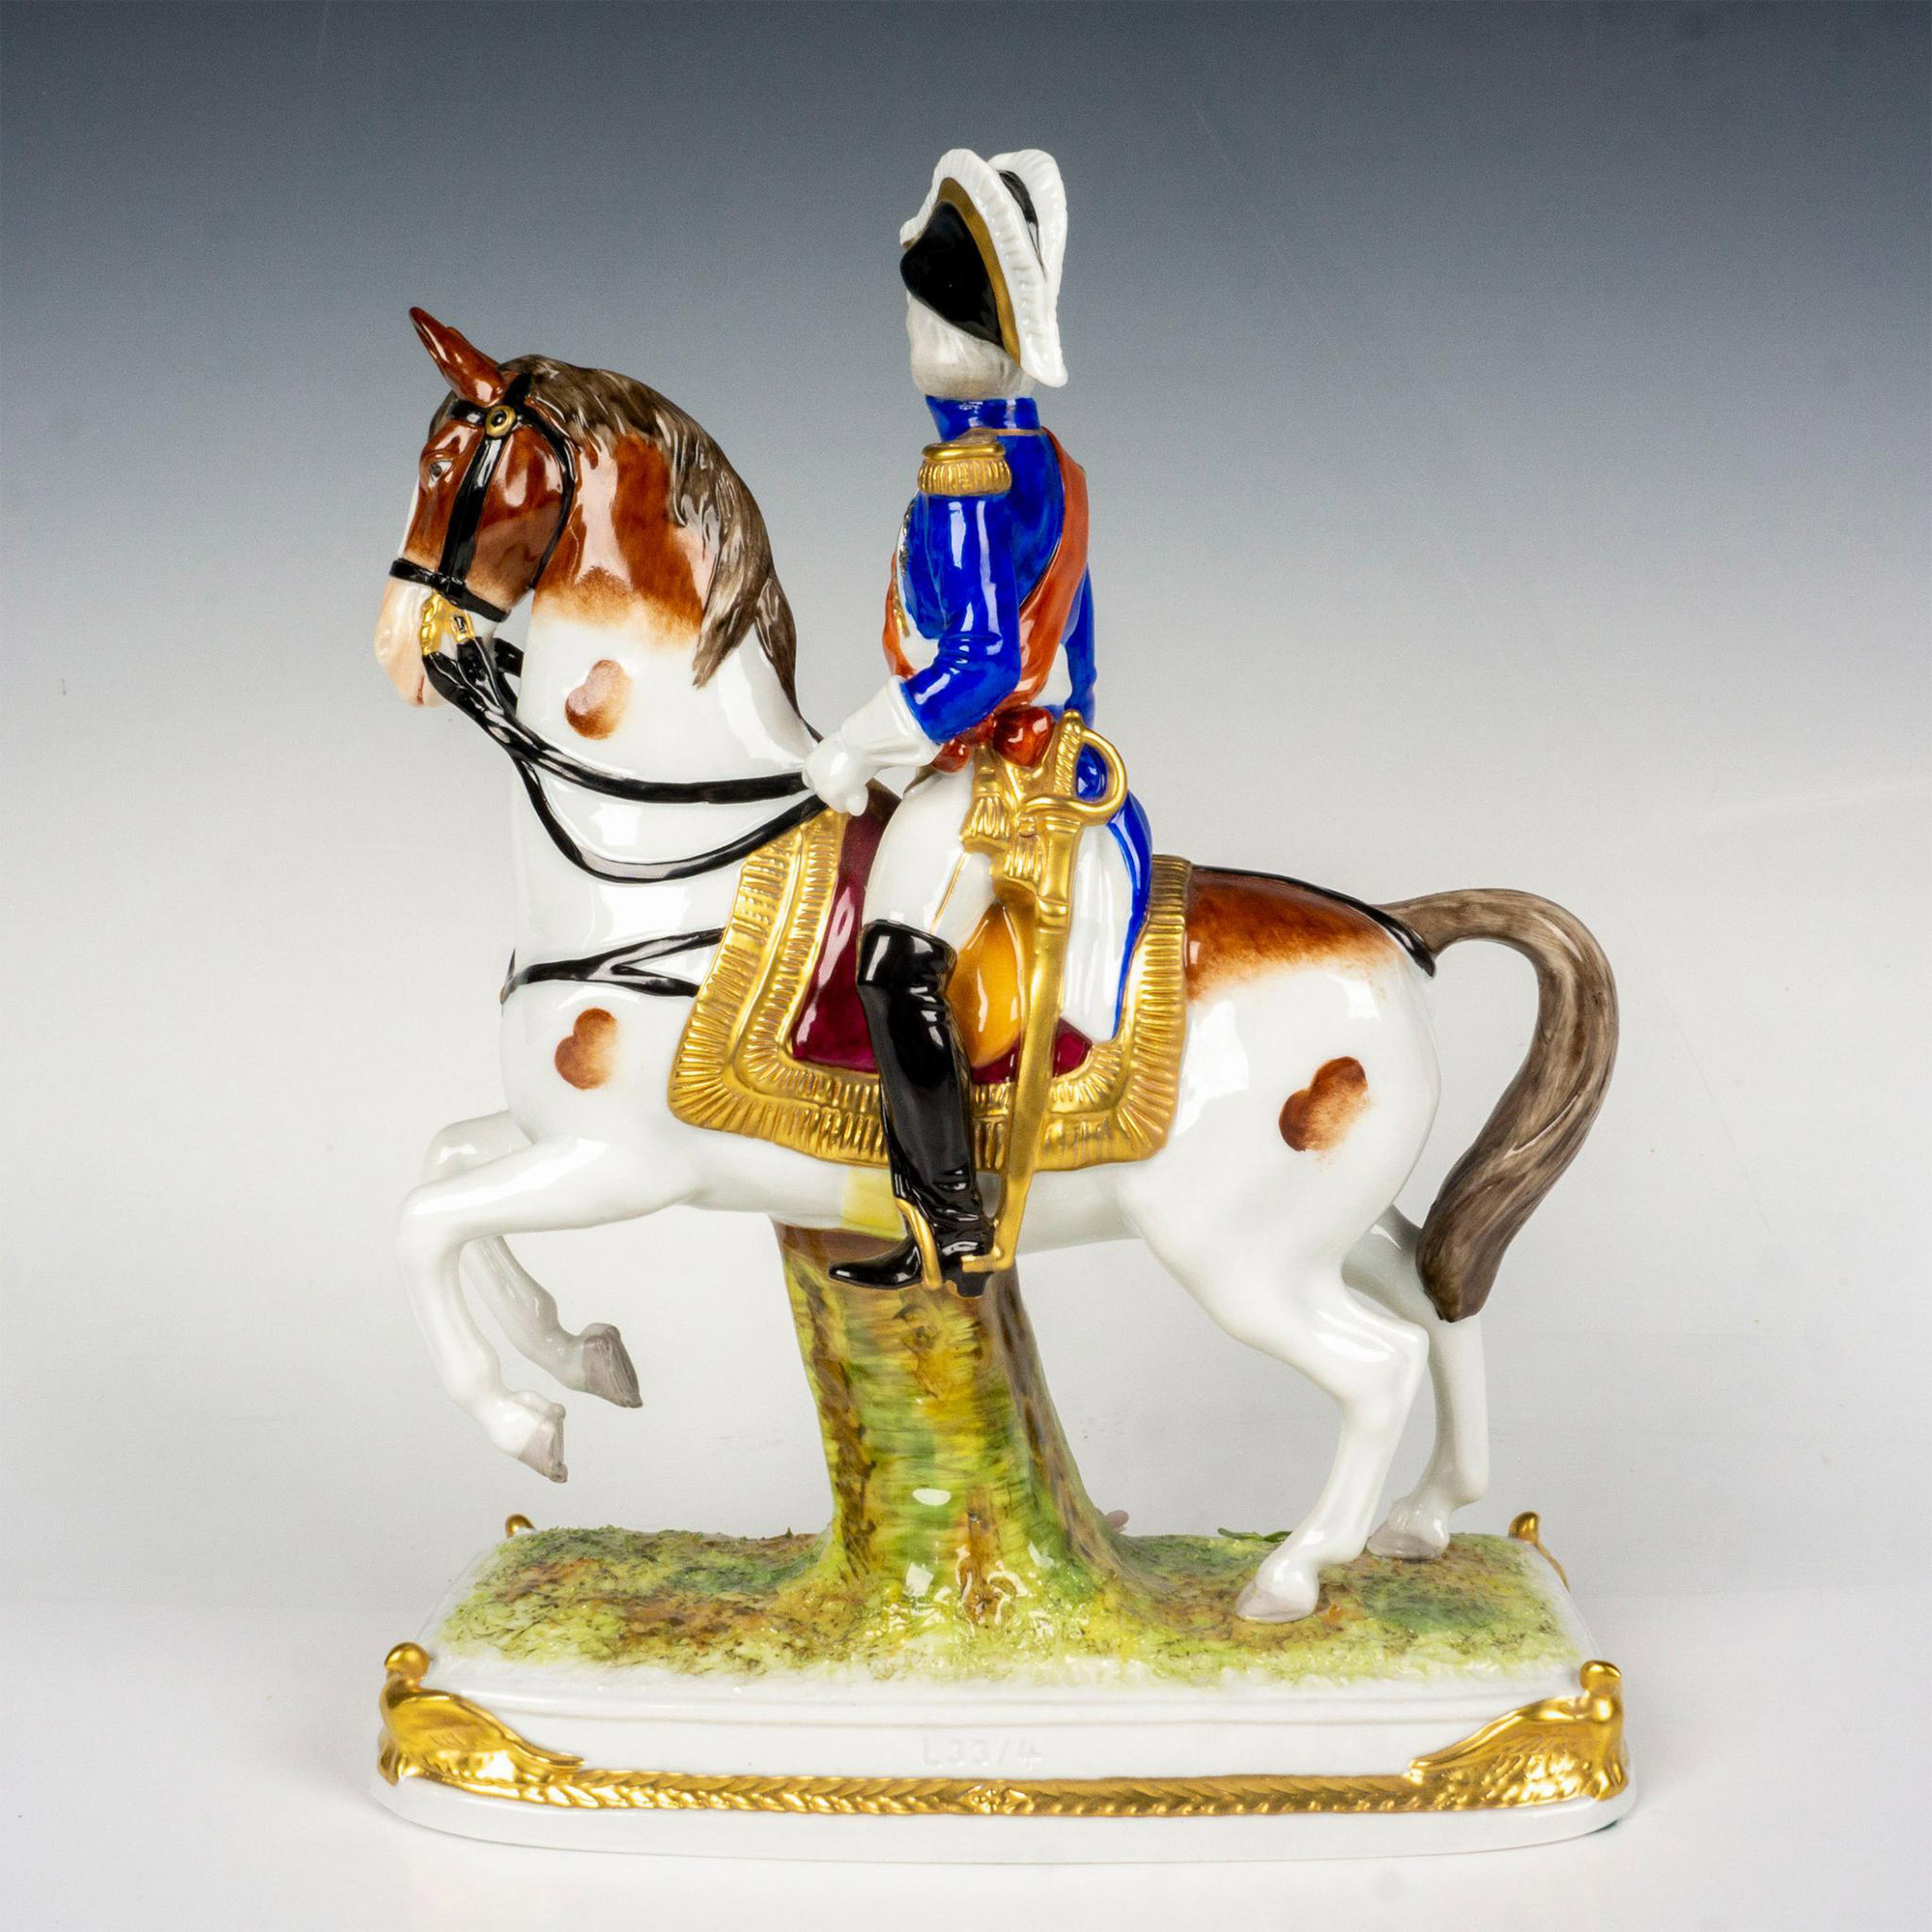 Scheibe Alsbach Porcelain Figurine, Soult - Image 2 of 3